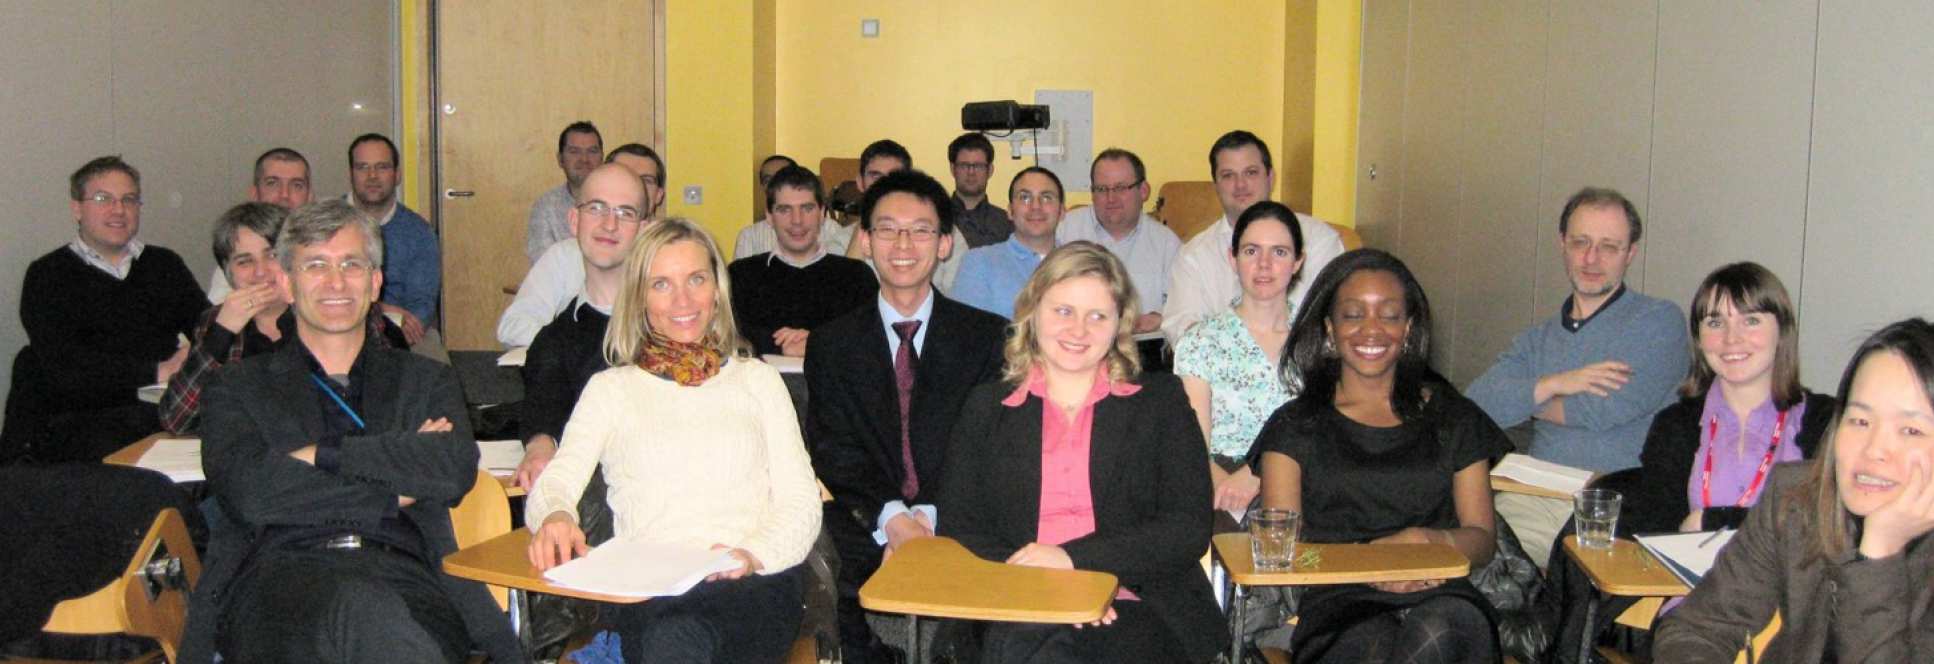 Participants of an update meeting, February 2011